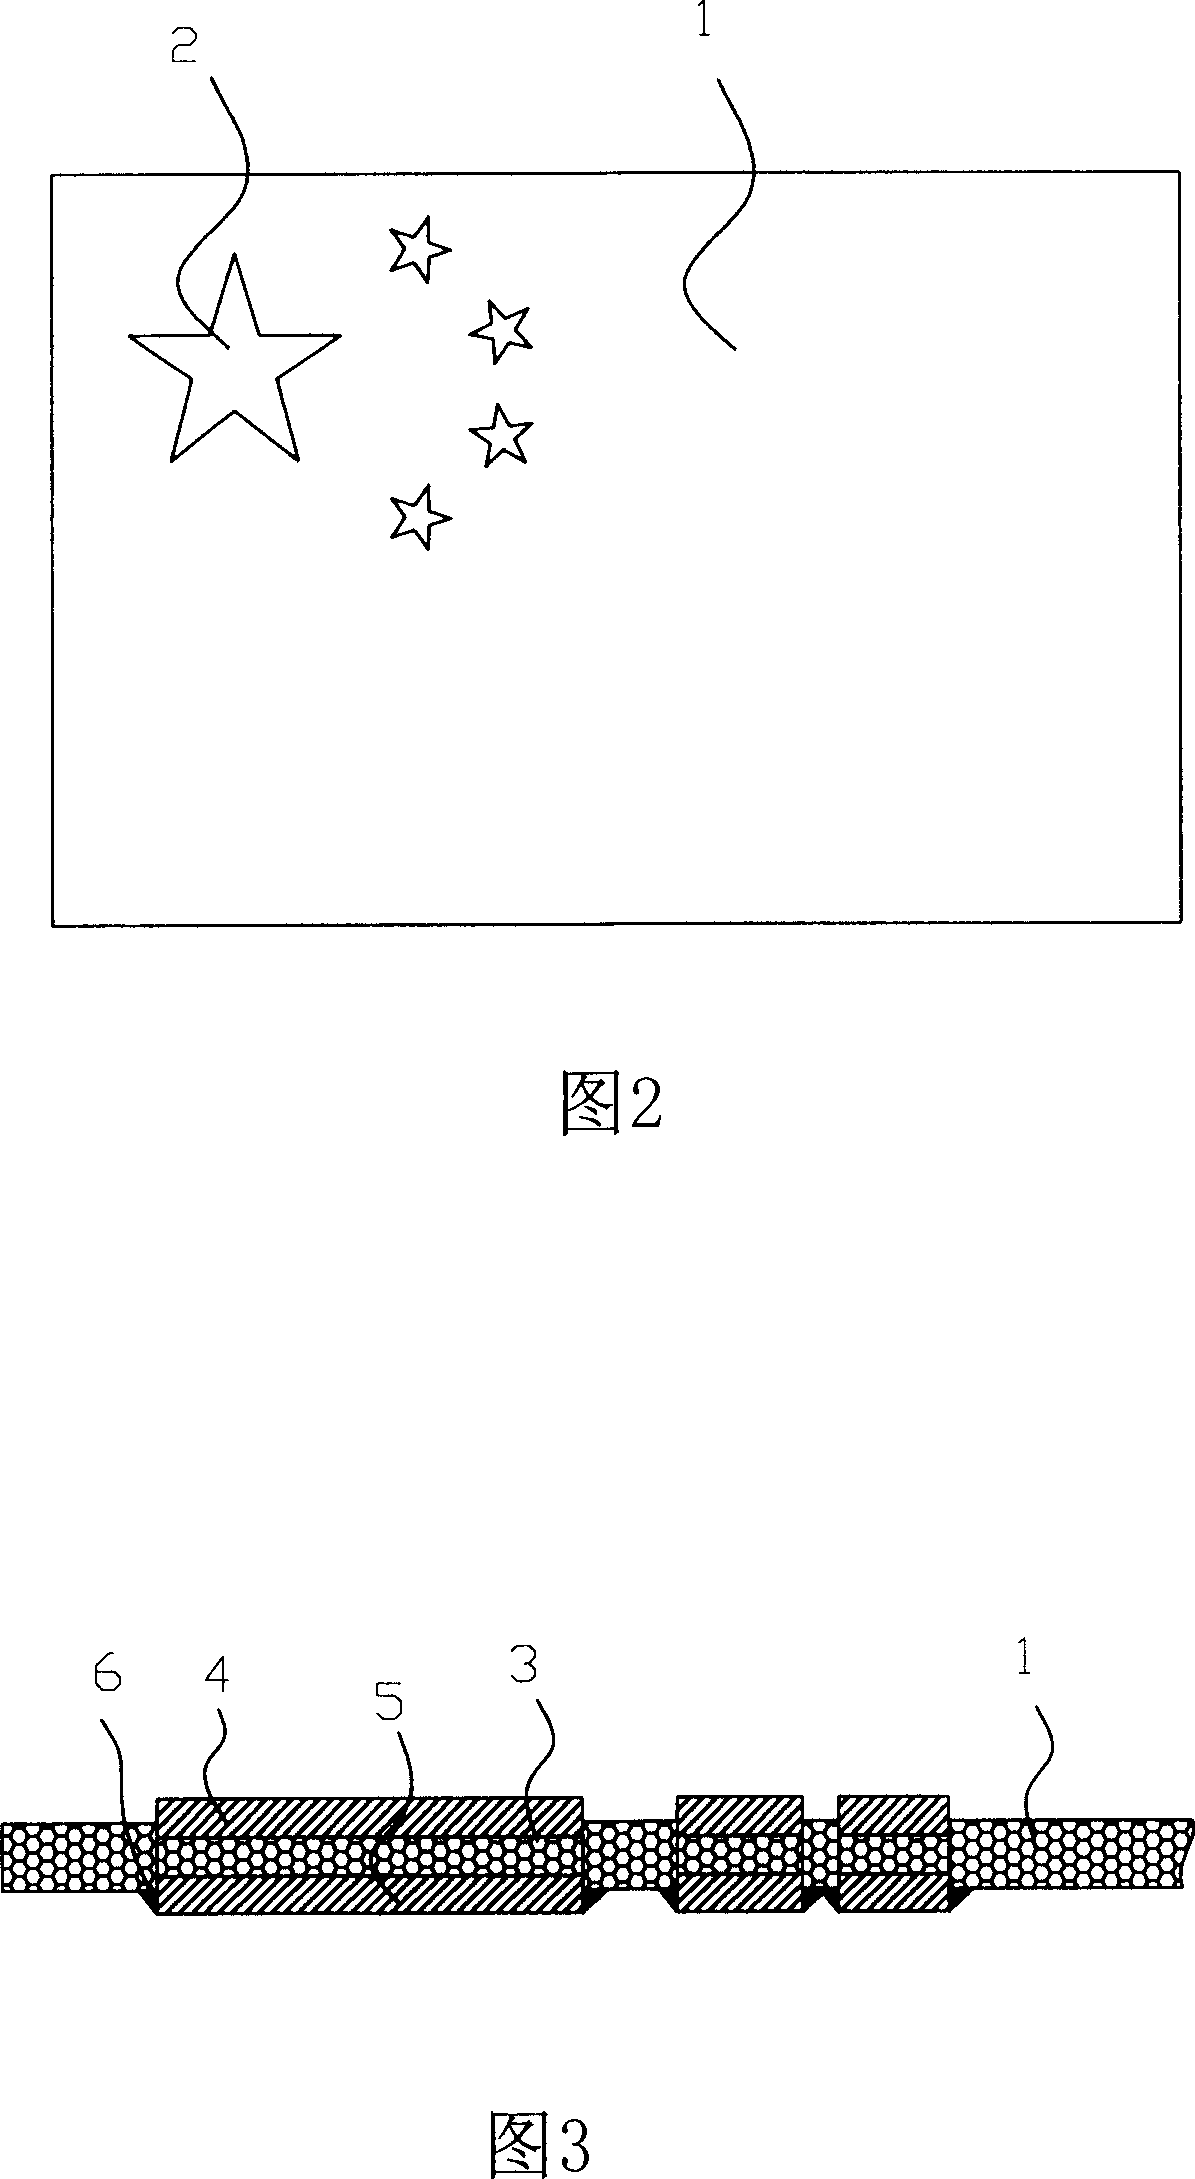 Method for manufacturing color double-face symmetrical pattern jacquard